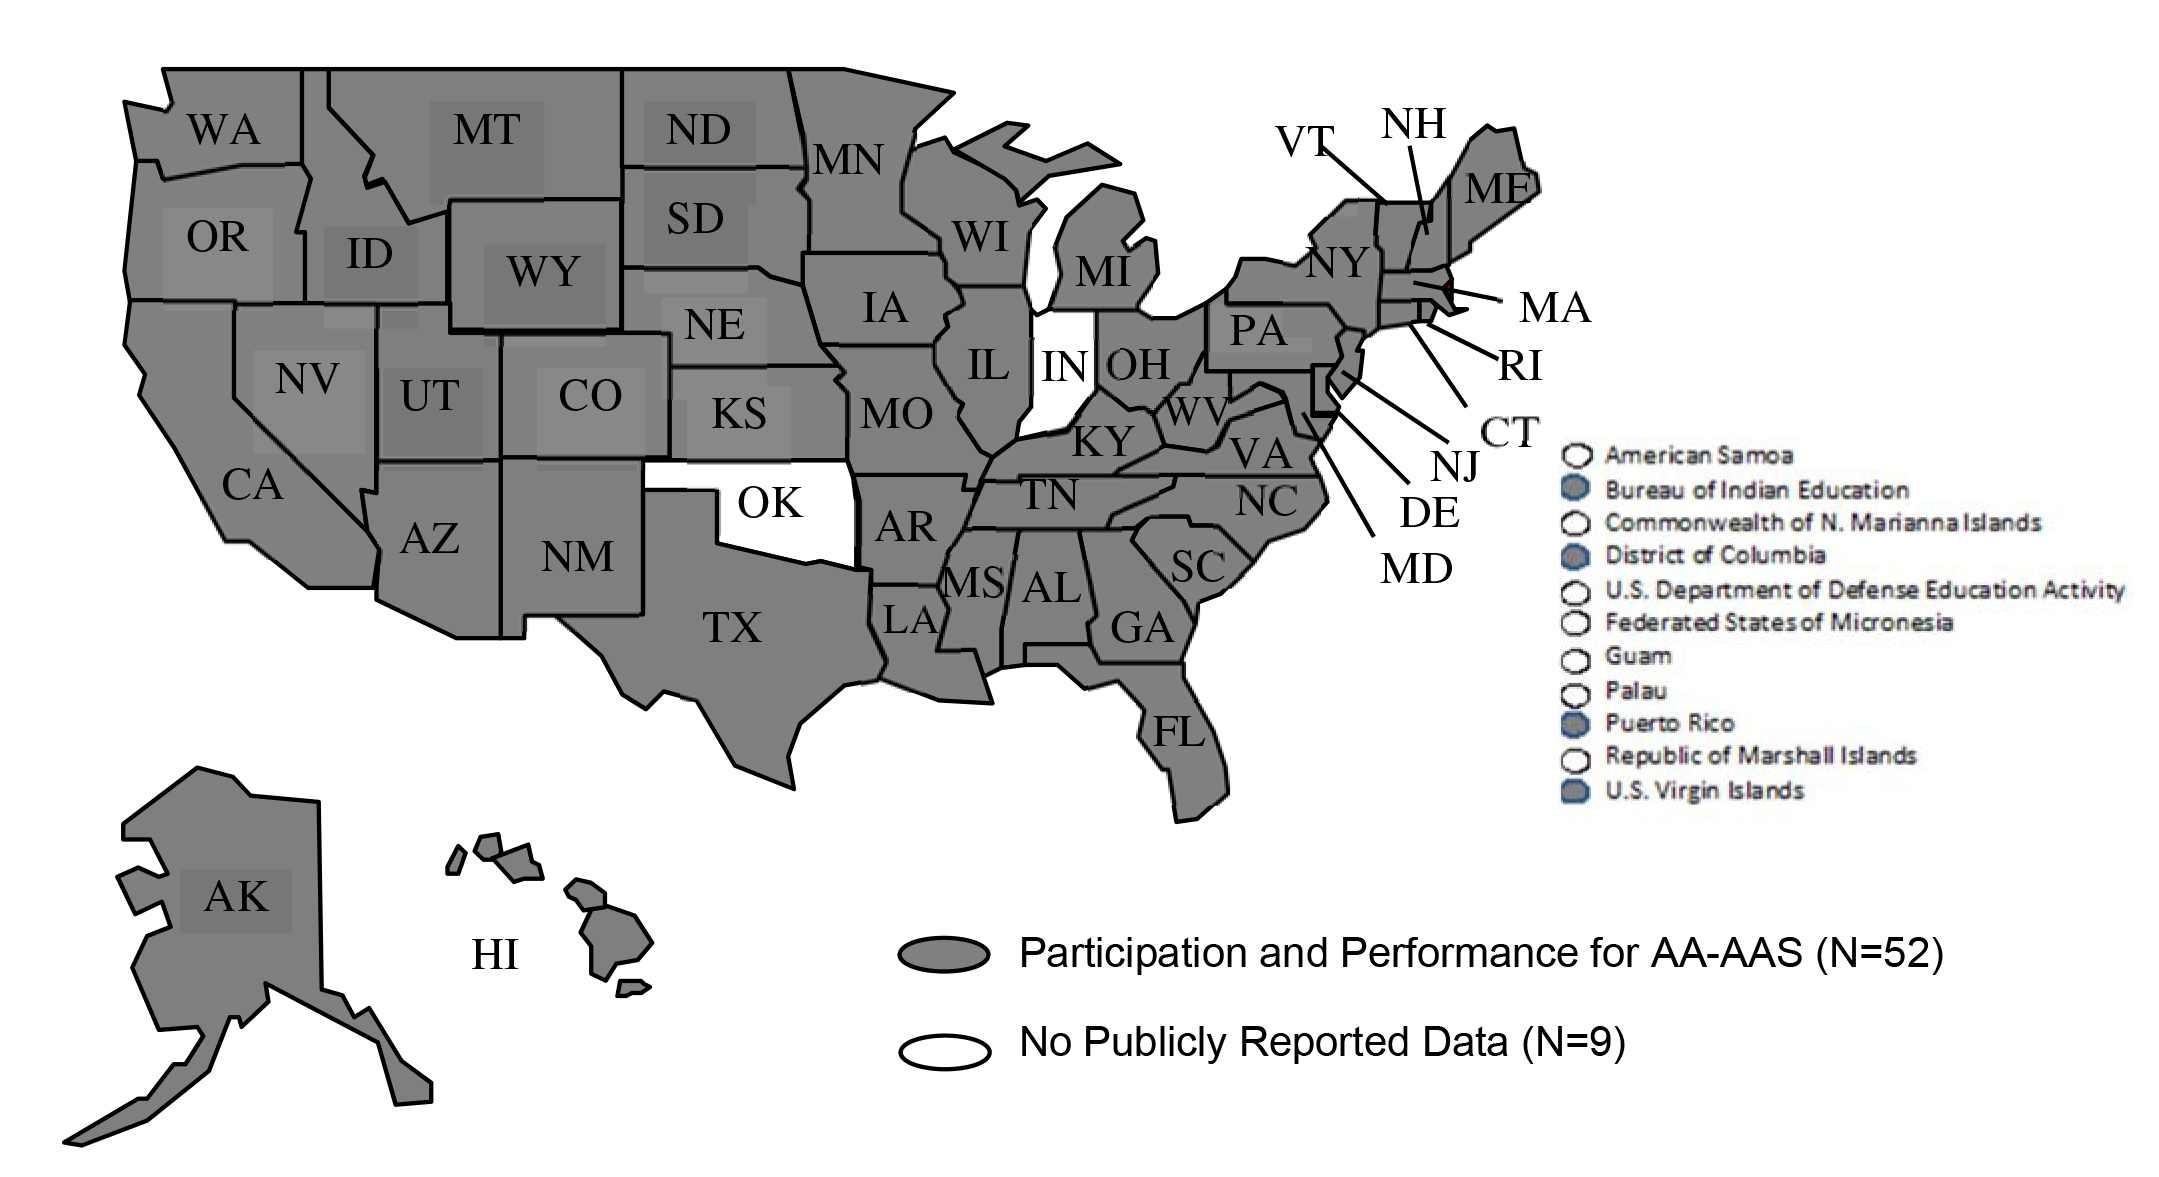 Figure 6 shows States Reporting 2012-13 Participation or Performance Data for Students with Disabilities on AA-AAS* Used for Title I Accountability